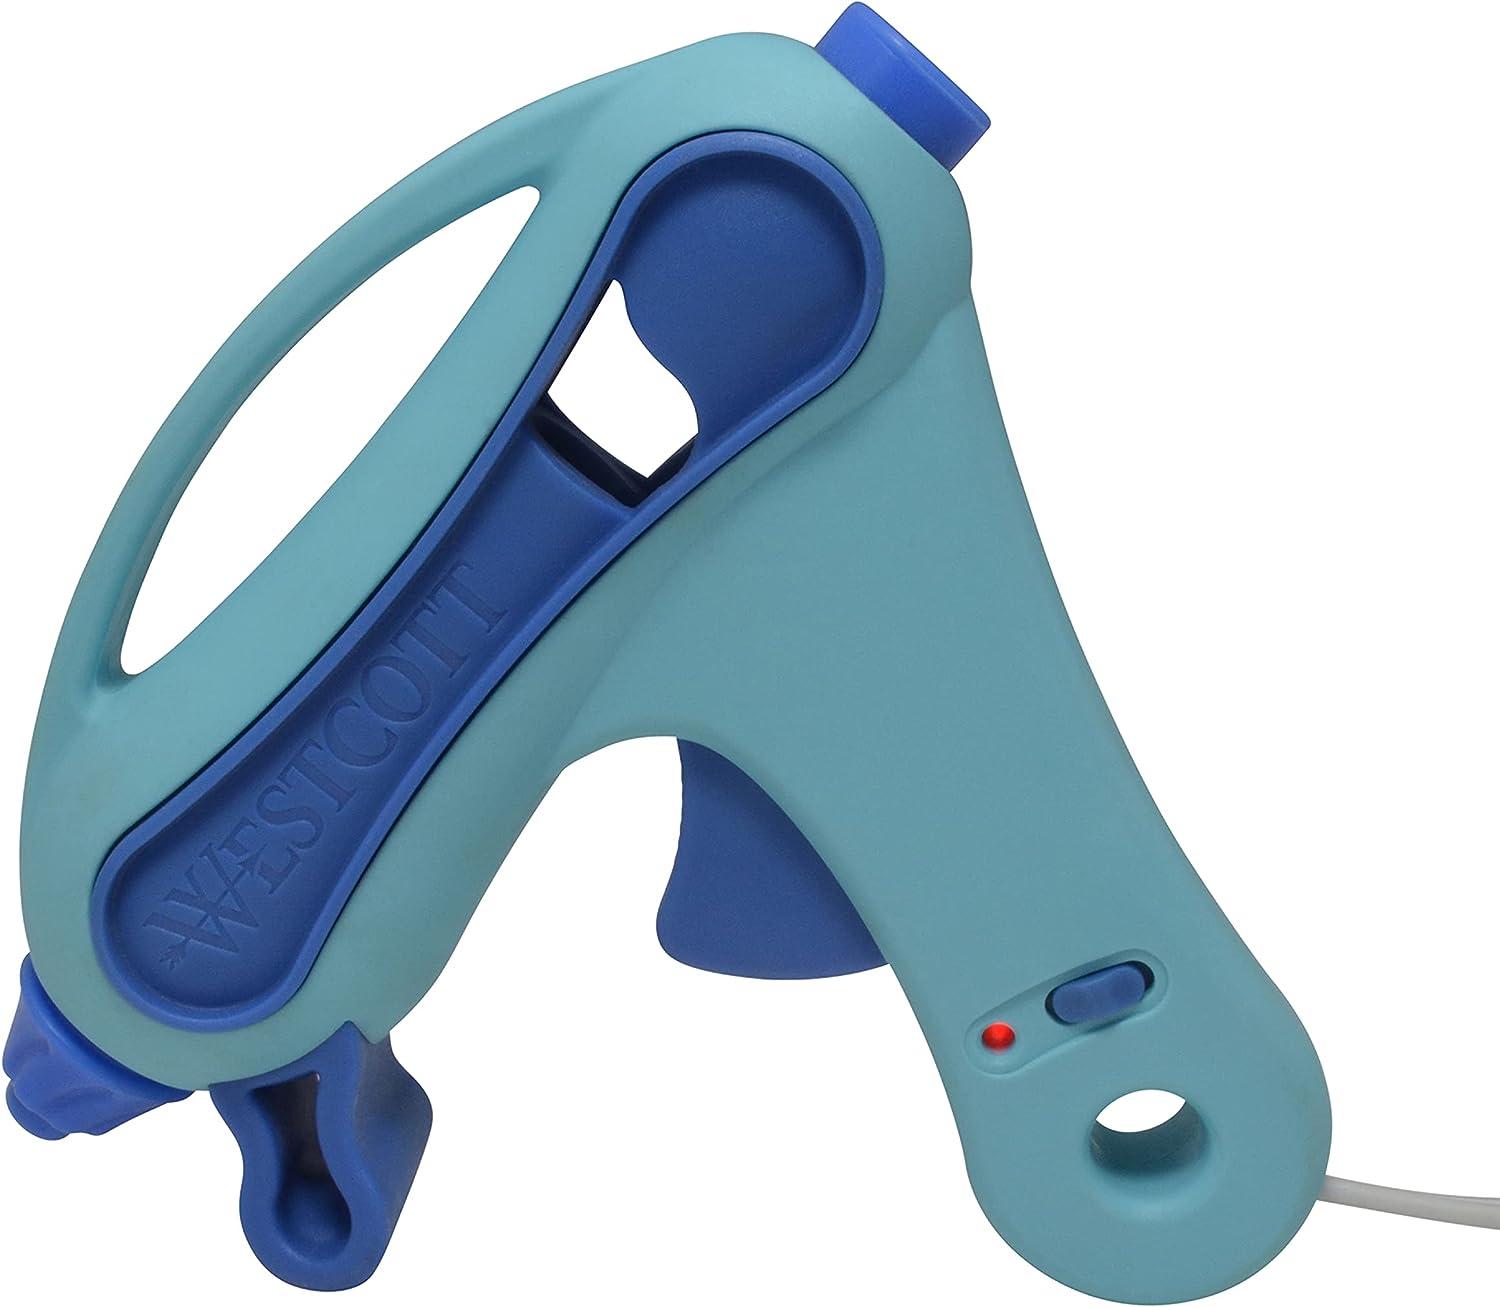 Westcott - Westcott So Cool! Low-Temp Glue Gun for Young Crafters,  Assorted Colors (17874-Parent)